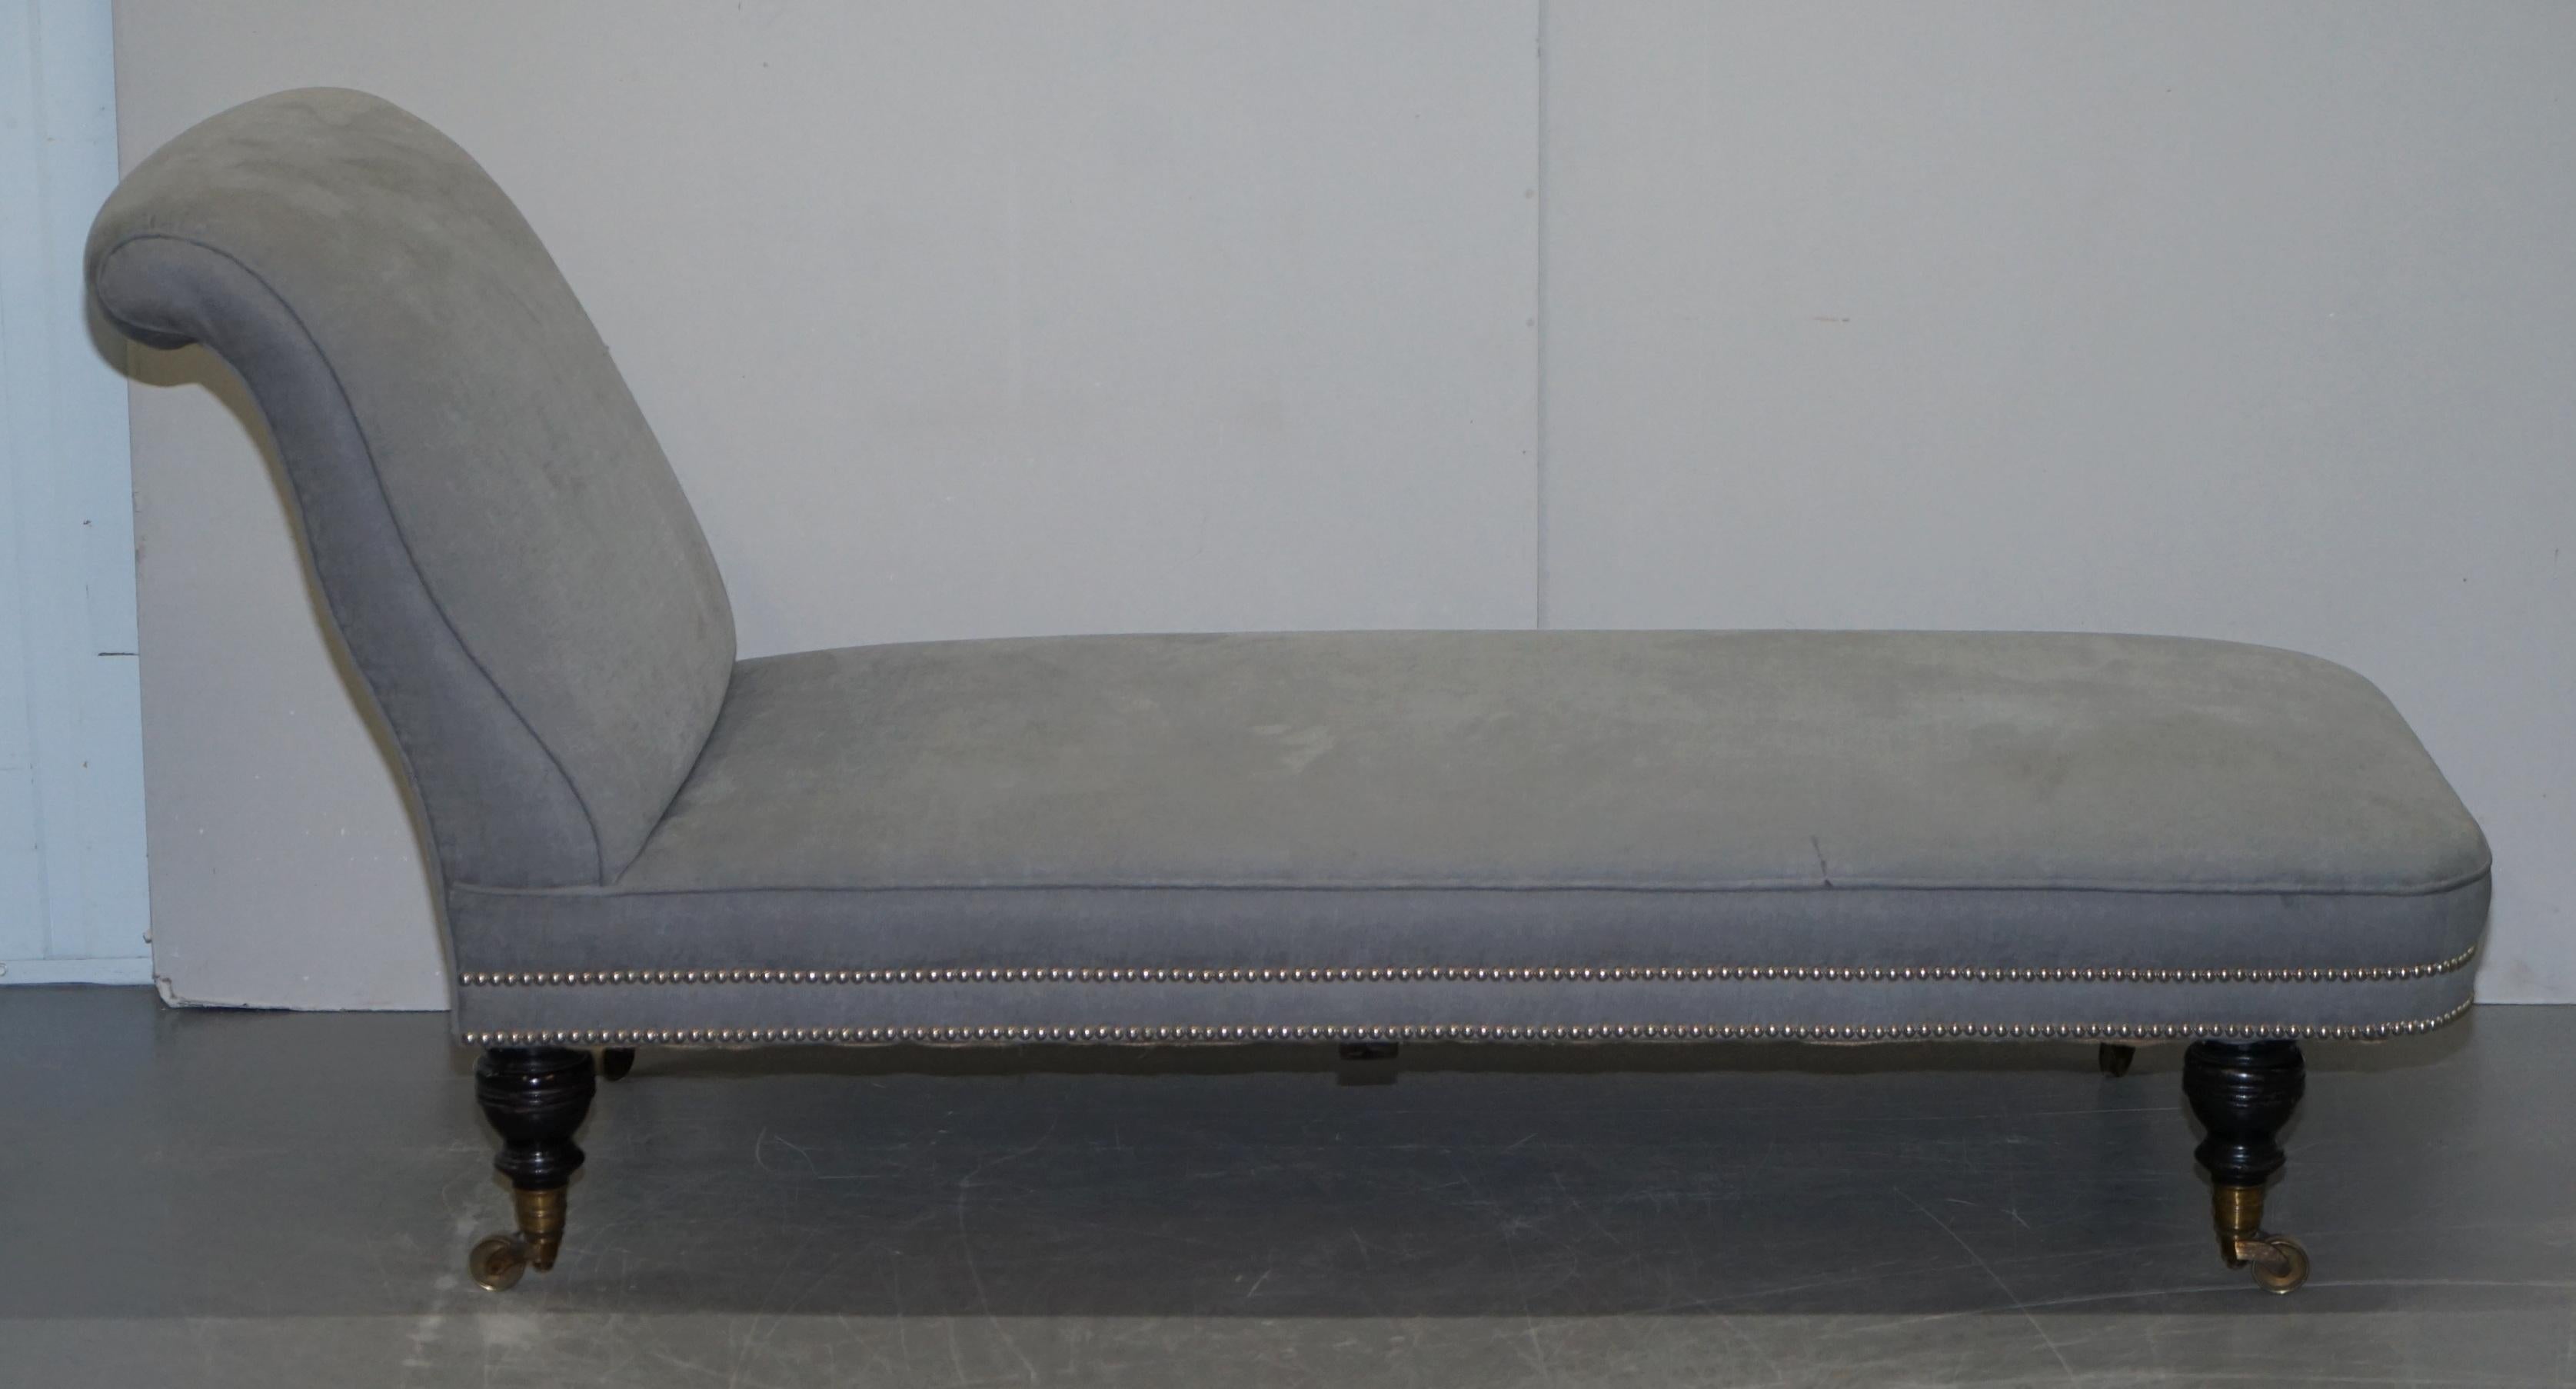 Howard & Son's Berners Street Fully Stamped Chaise Lounge Armchair Window Seat 4